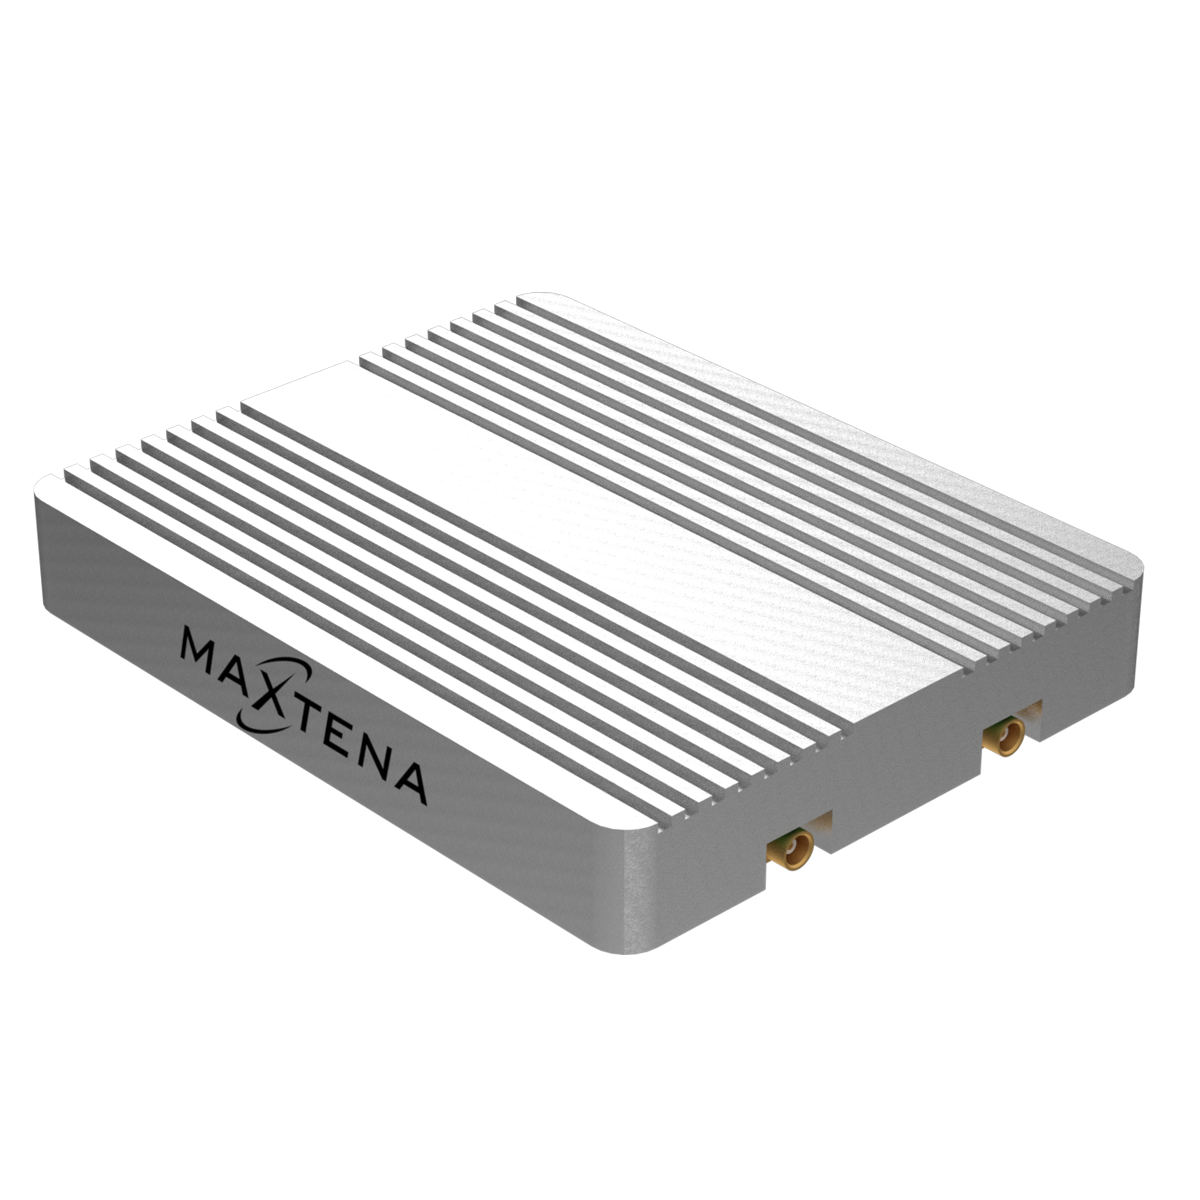 Software Defined Radio Module with Native RF Cybersecurity and Artificial Intelligence